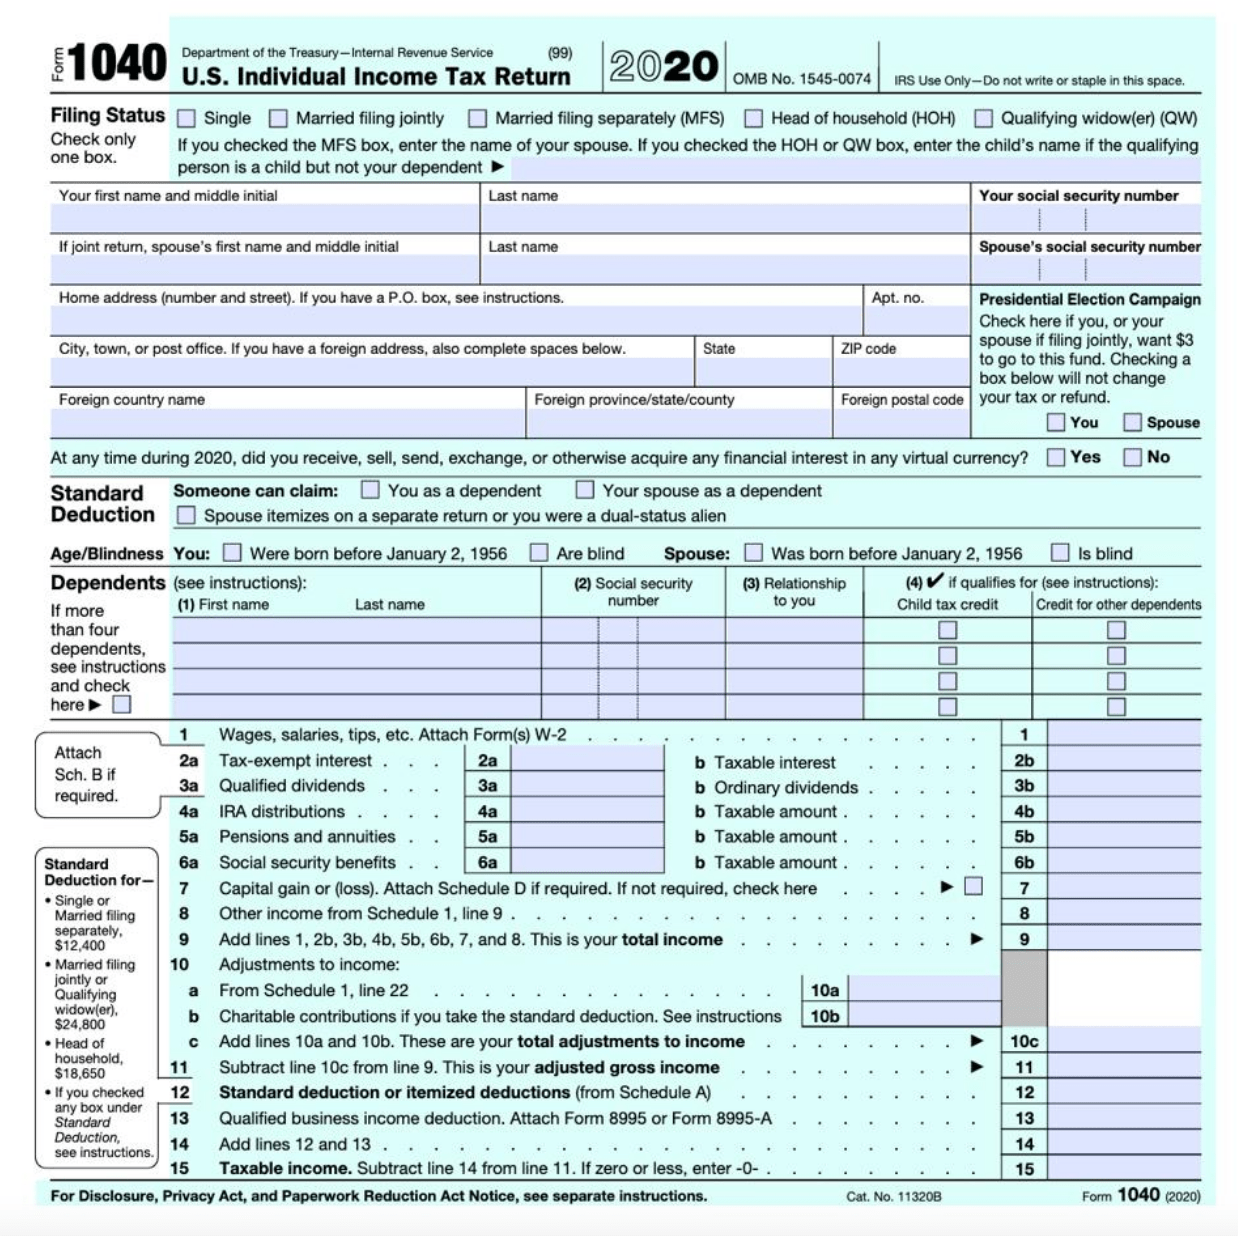 IRS Releases Form 1040 For 2020 Tax Year